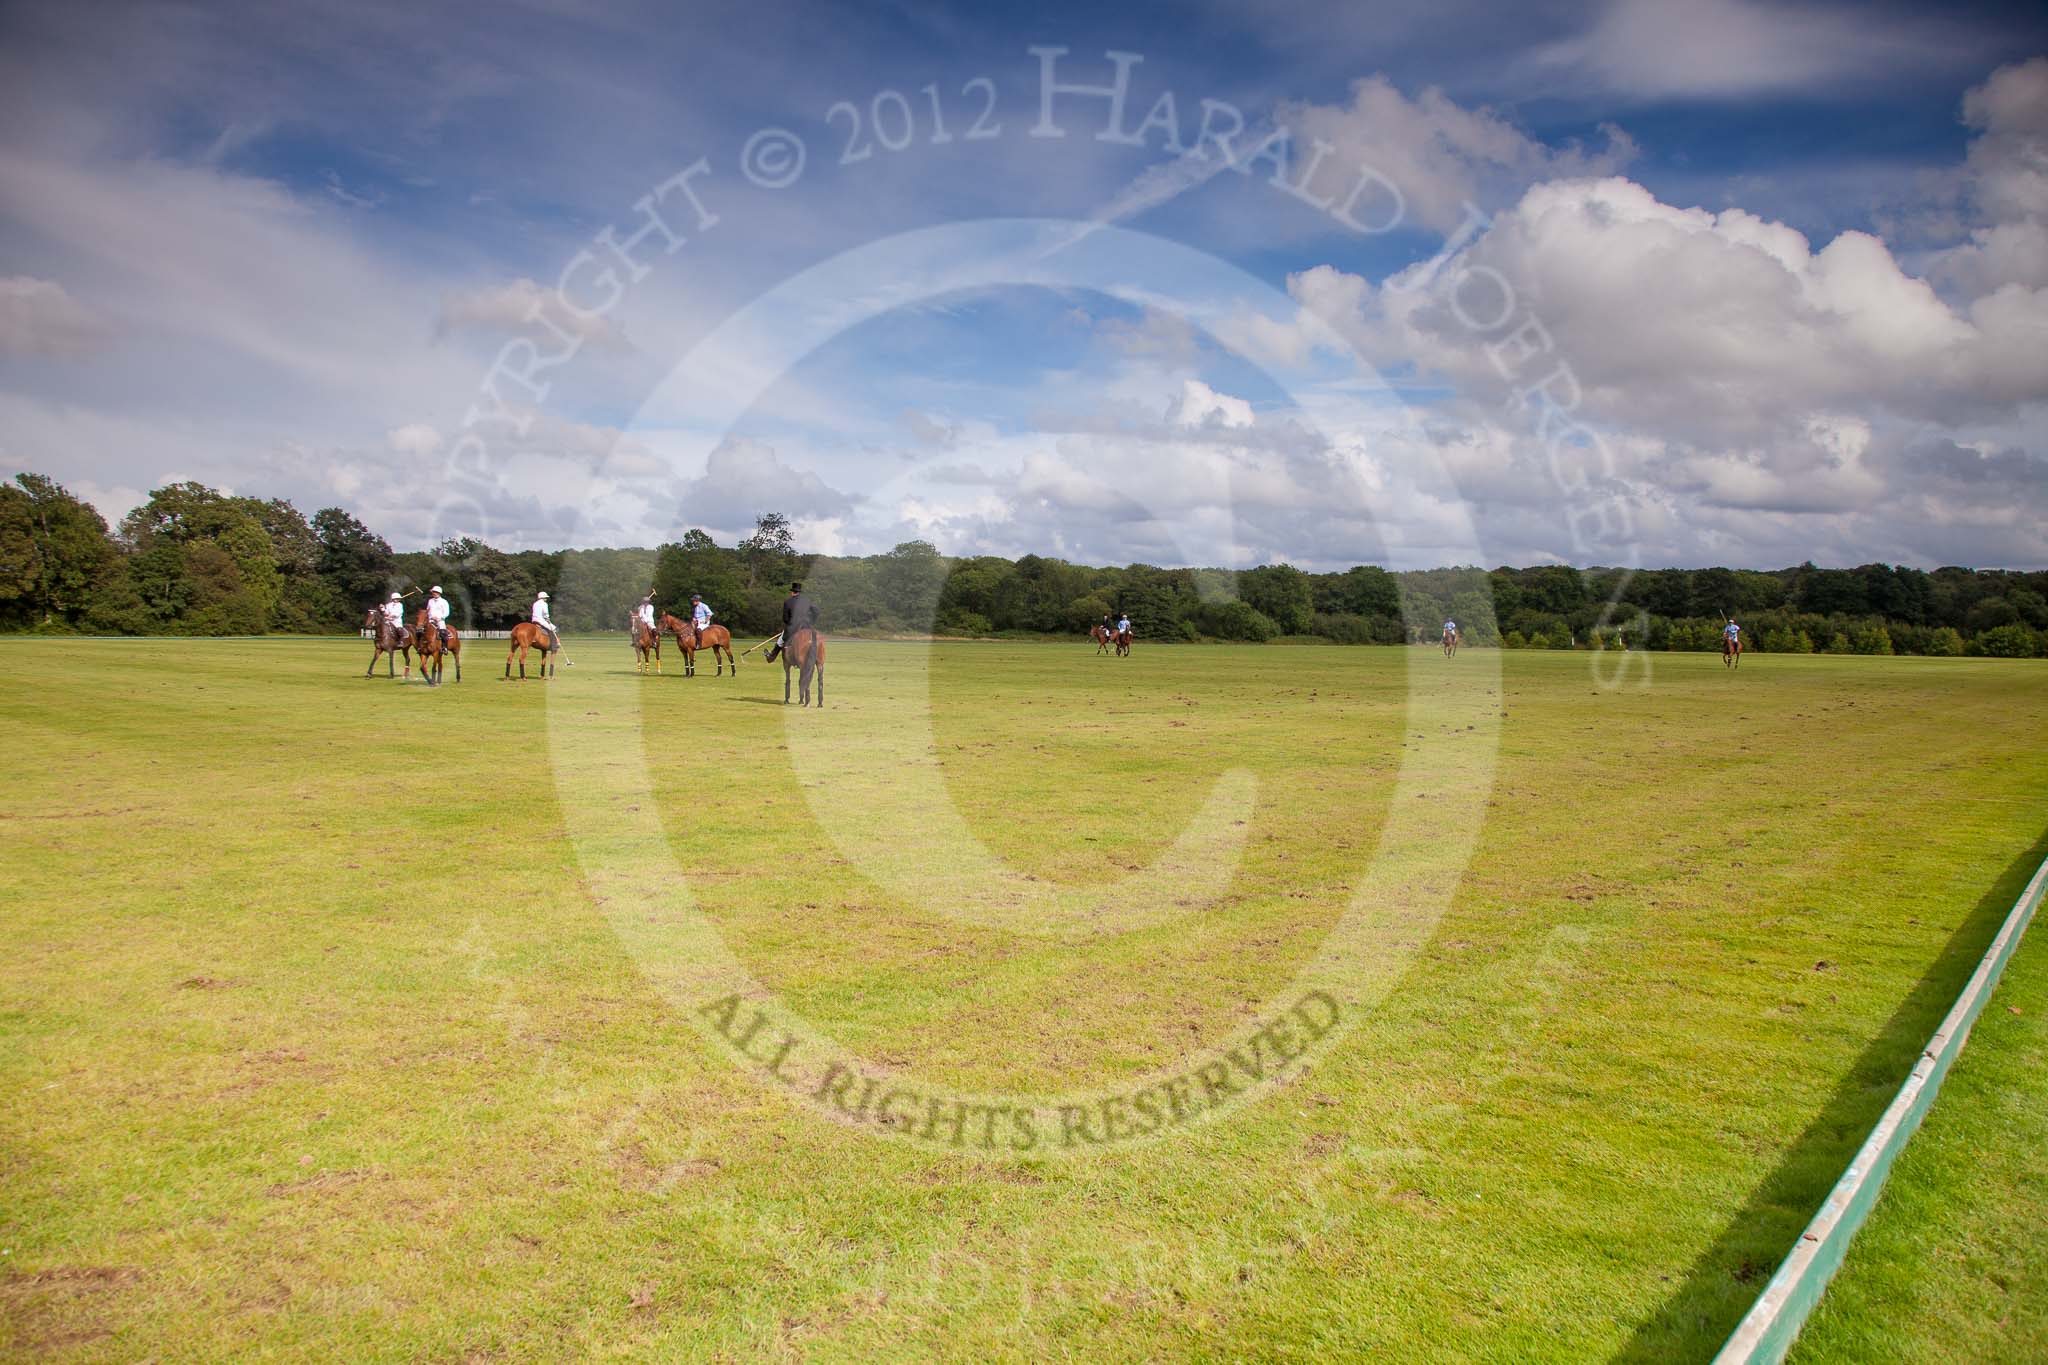 7th Heritage Polo Cup semi-finals: Hurtwood Park Polo Pitch 2..
Hurtwood Park Polo Club,
Ewhurst Green,
Surrey,
United Kingdom,
on 04 August 2012 at 16:48, image #326